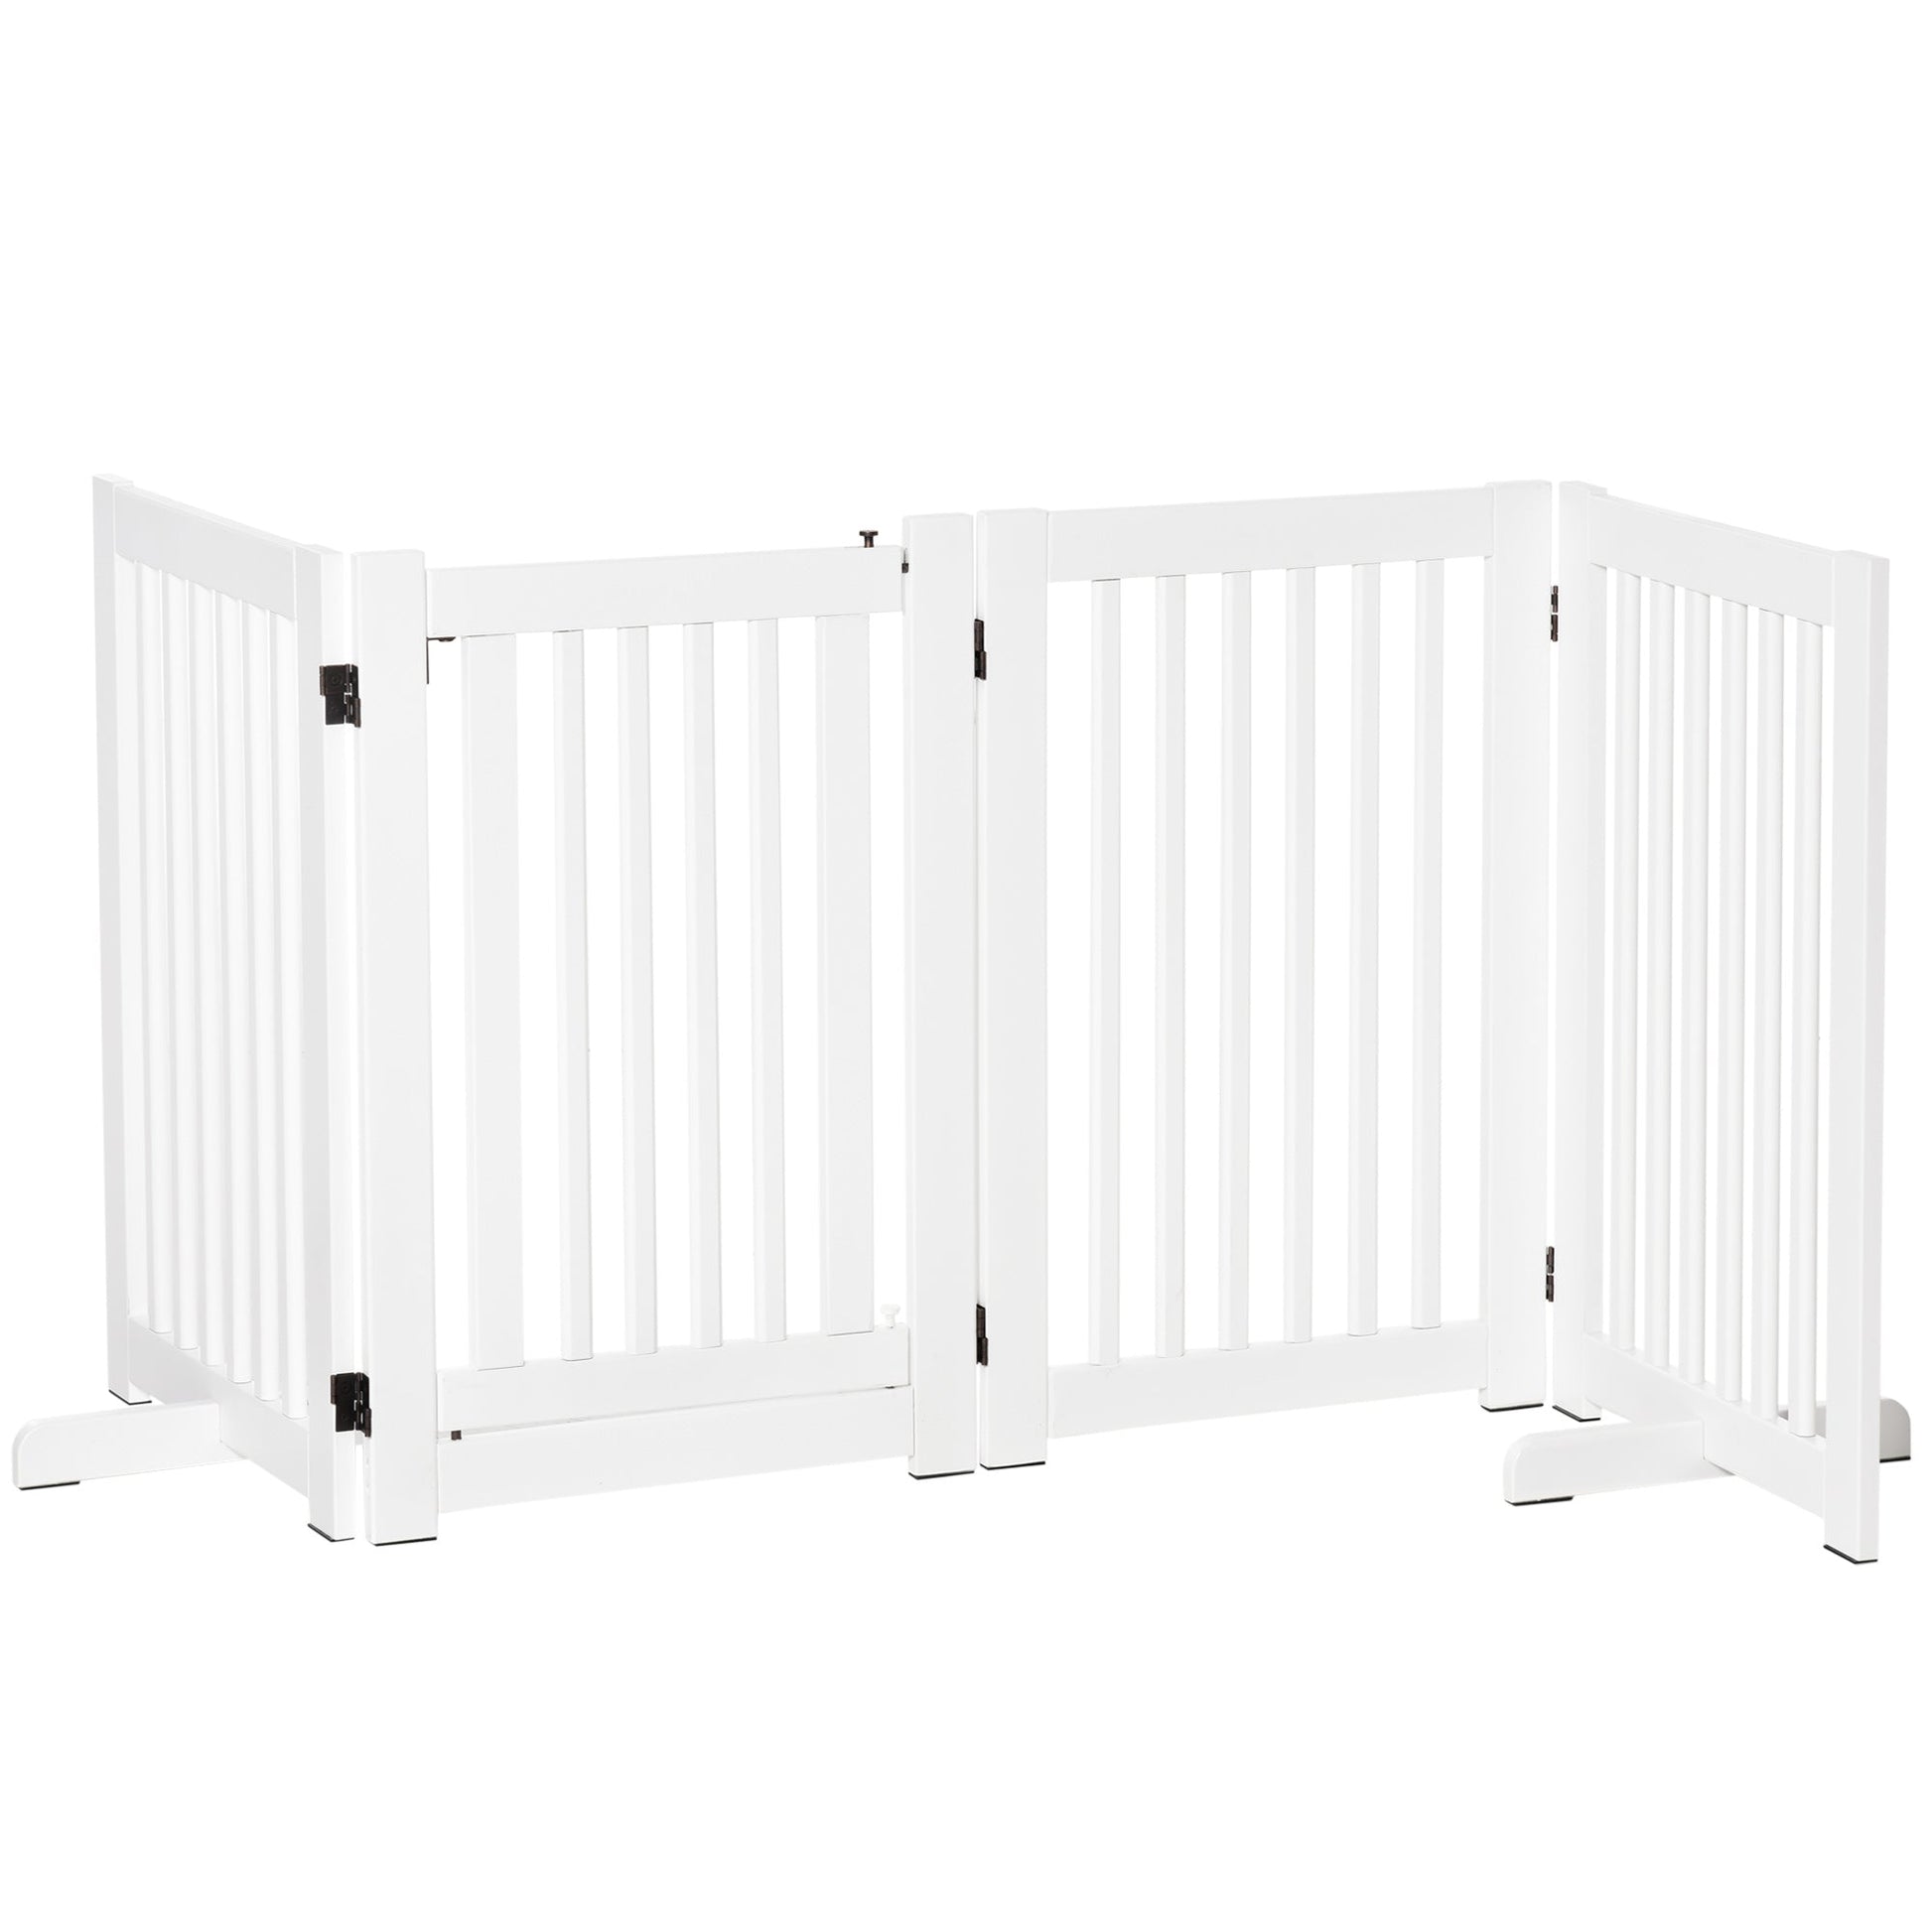 Free Standing Wooden Pet Gate Indoor Dog Barrier Foldable Step Over Doorway Fence Safety Gate with Open Door Z Shape 4 Panel at Gallery Canada